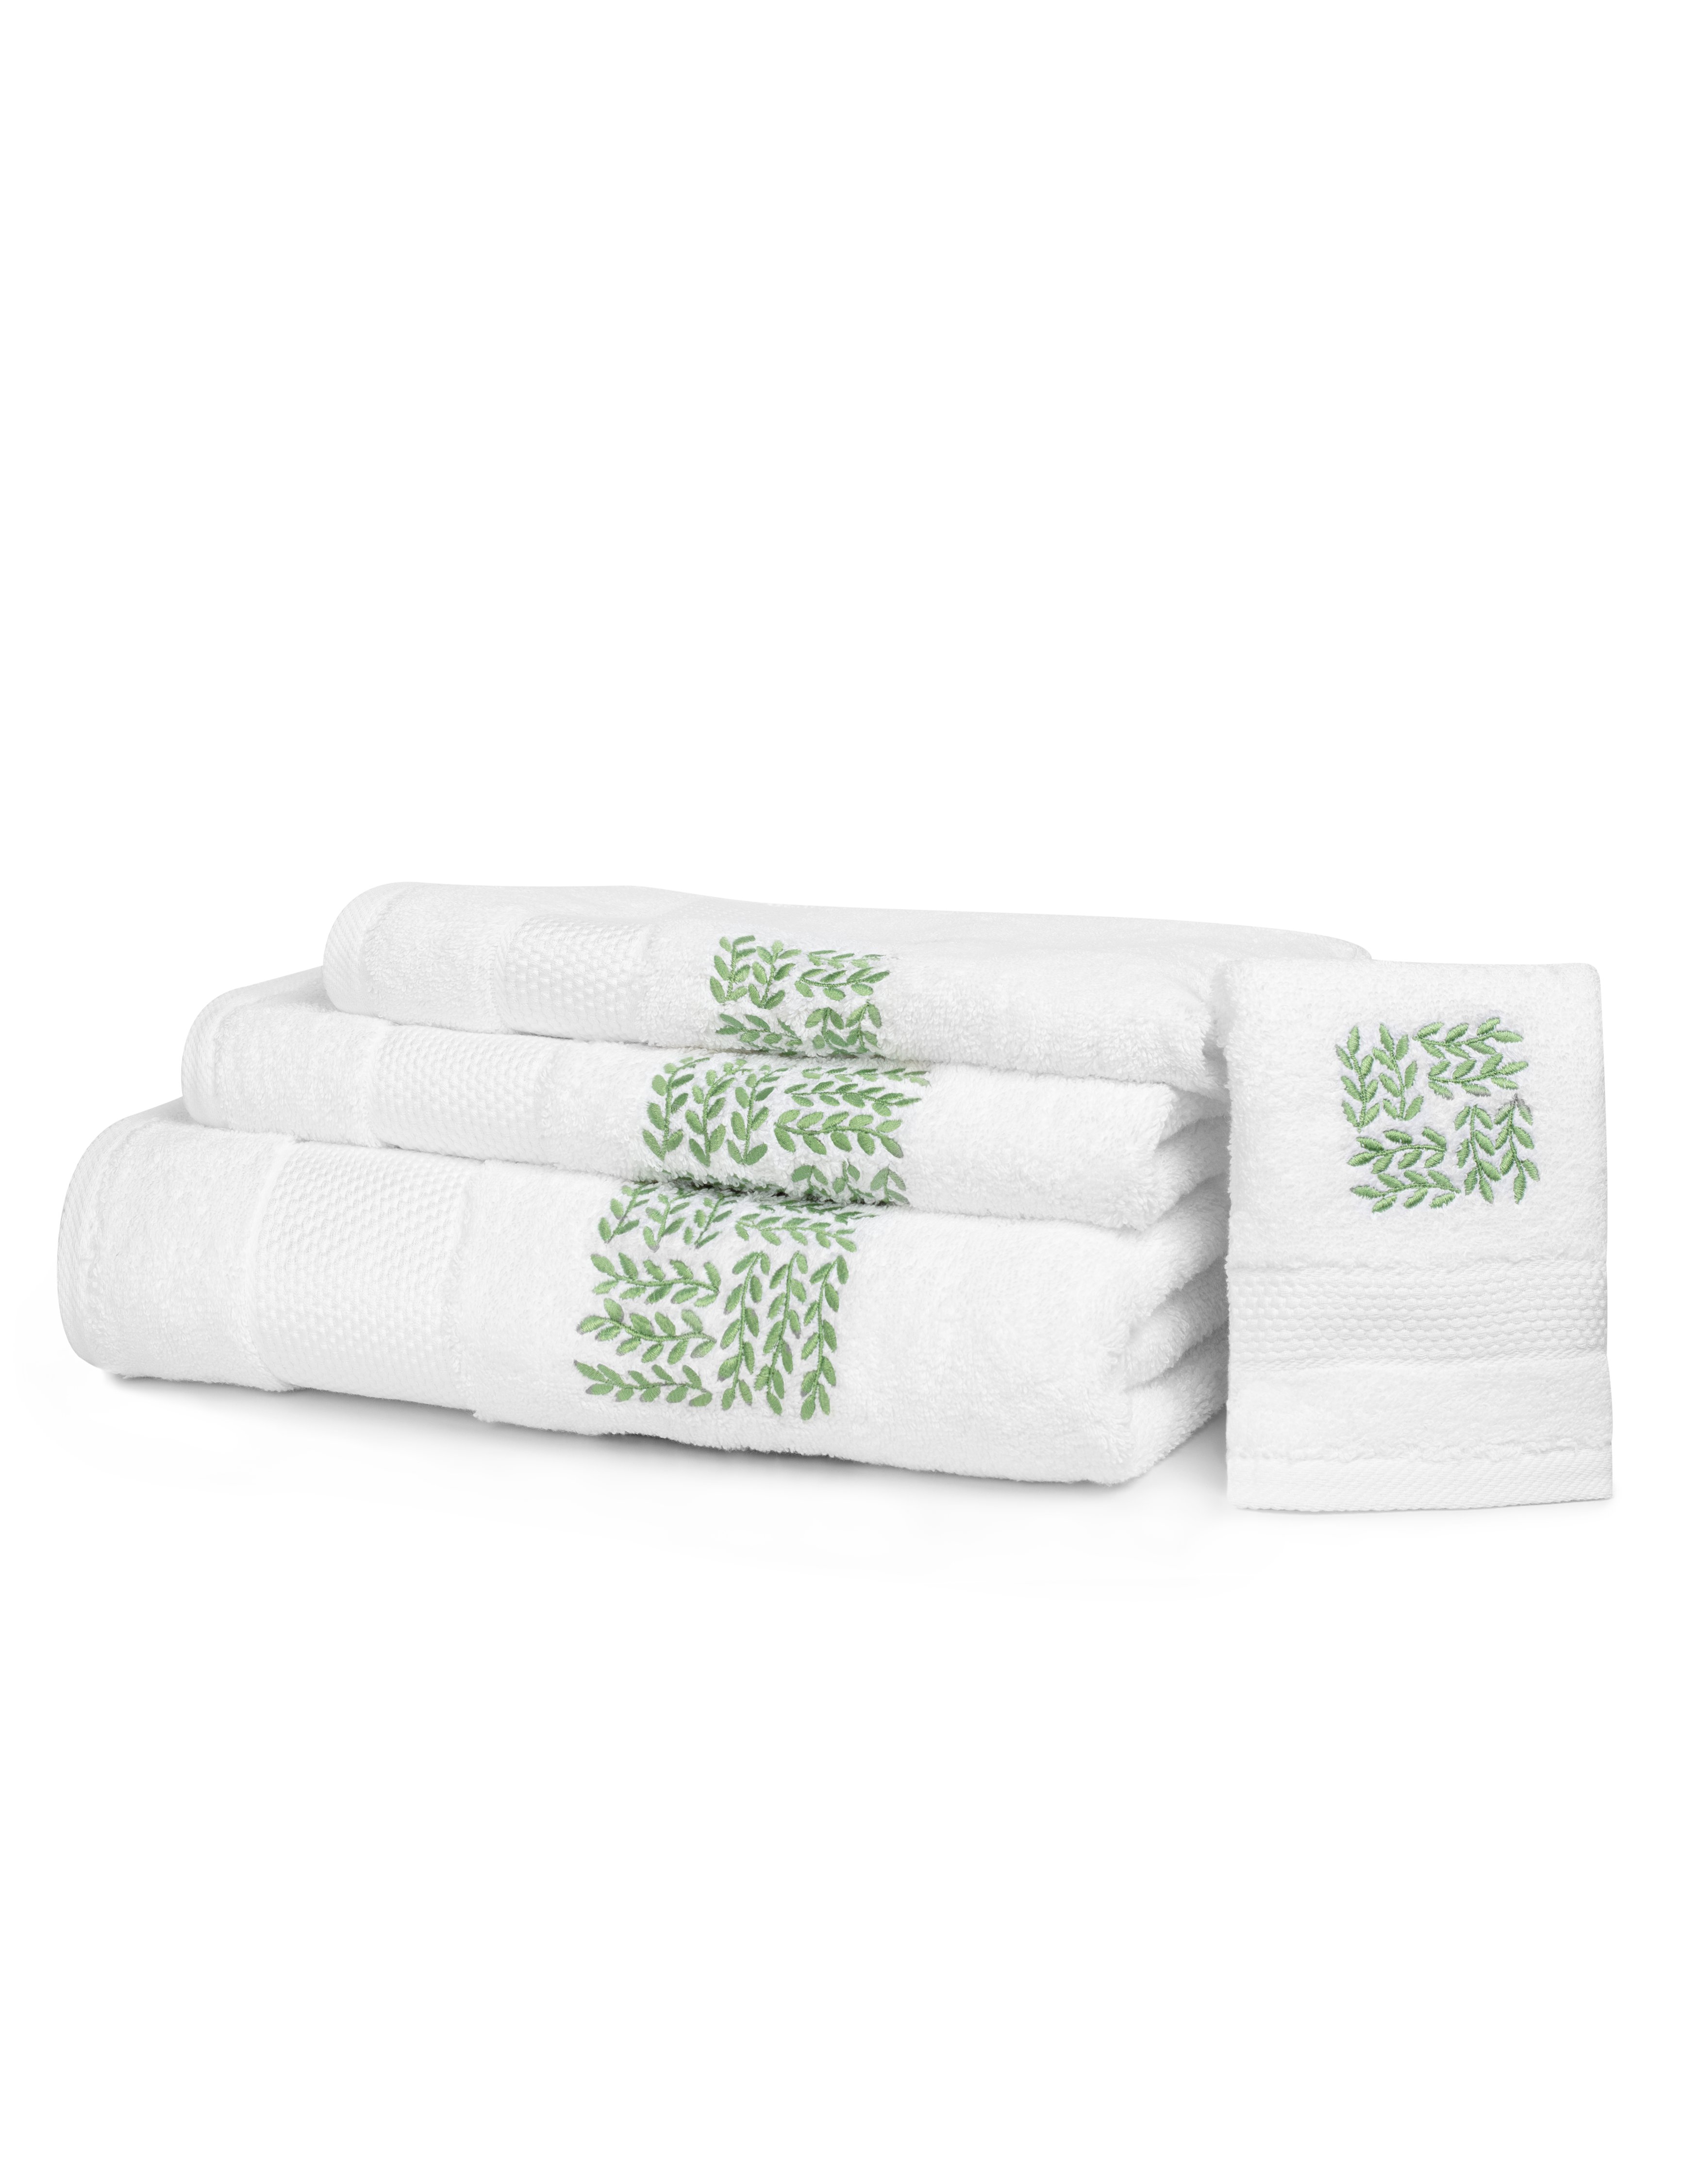 GARDEN PARTY embroidered bath towel